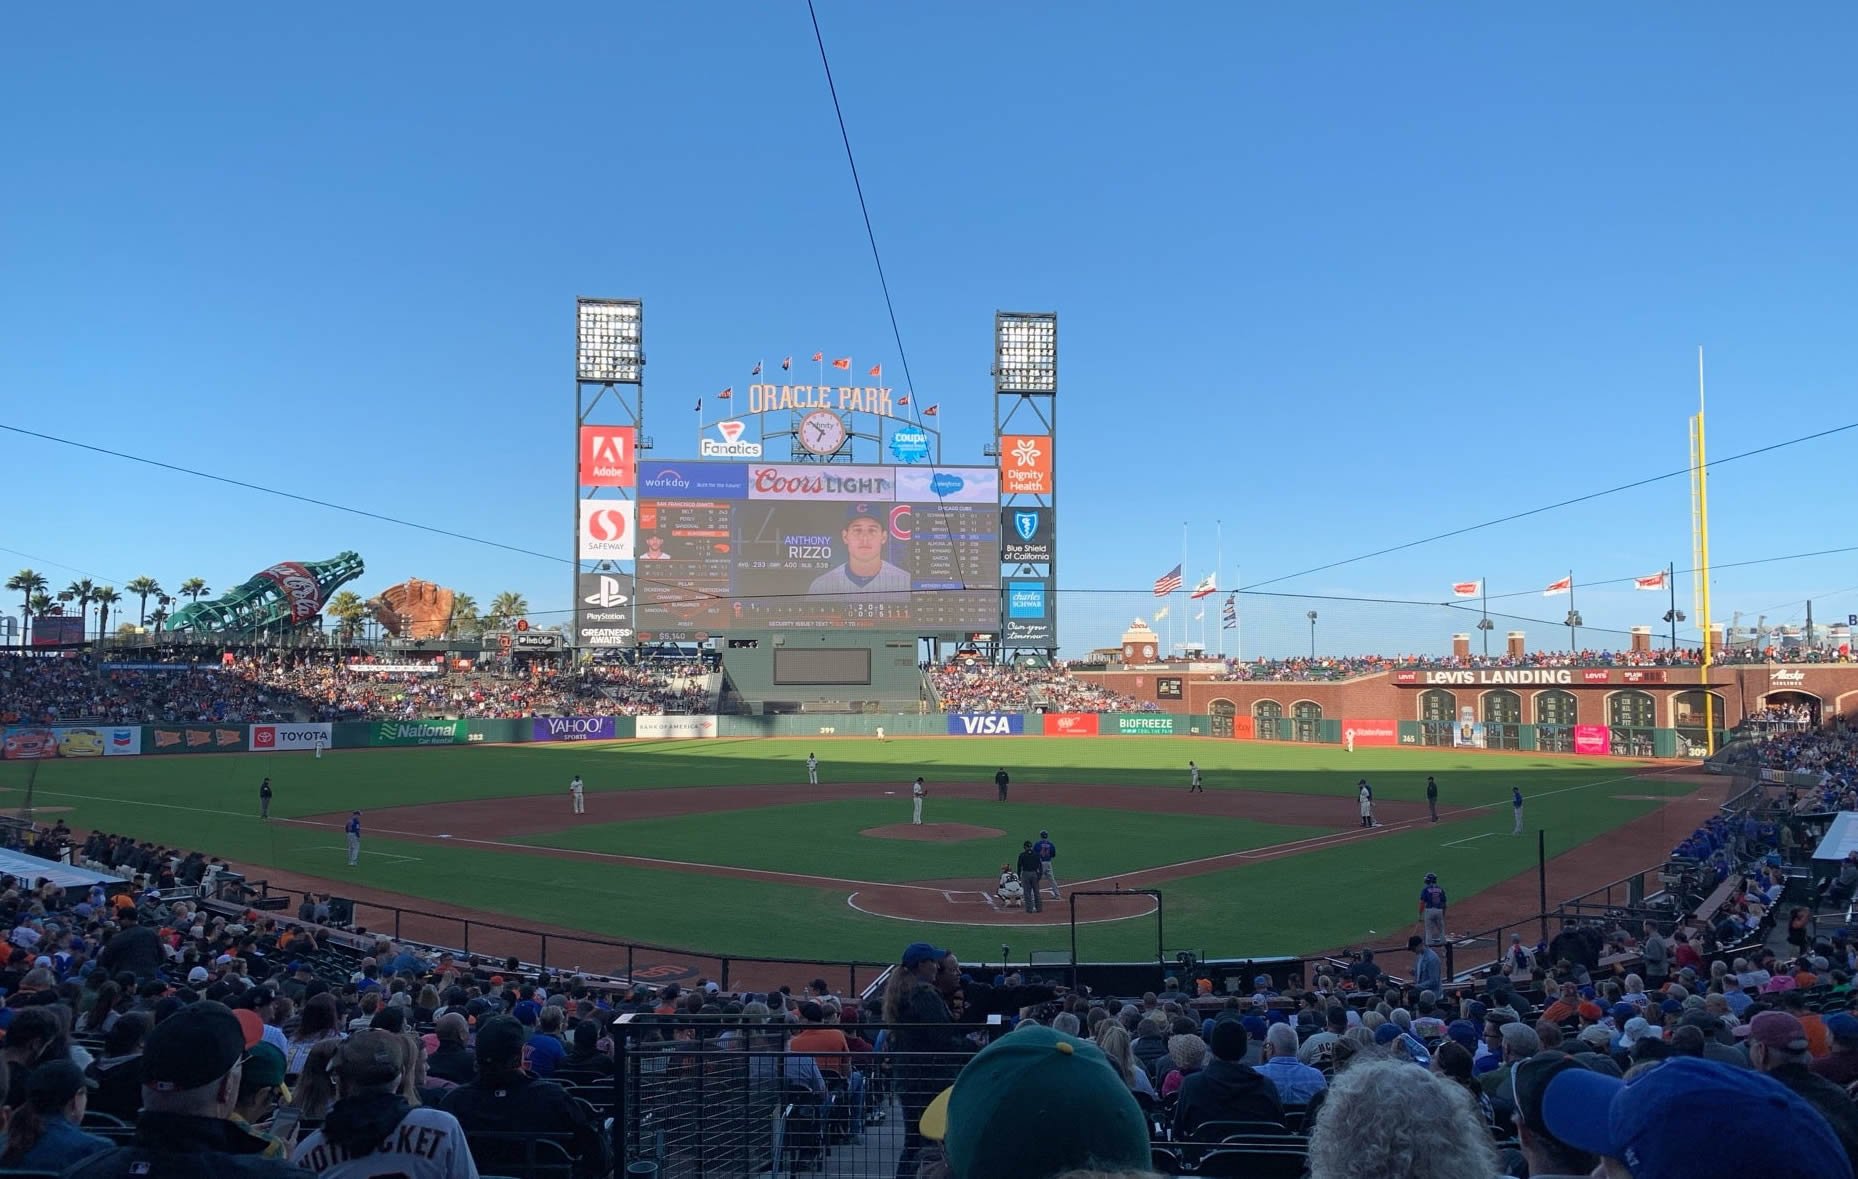 section 115, row 27 seat view  for baseball - oracle park